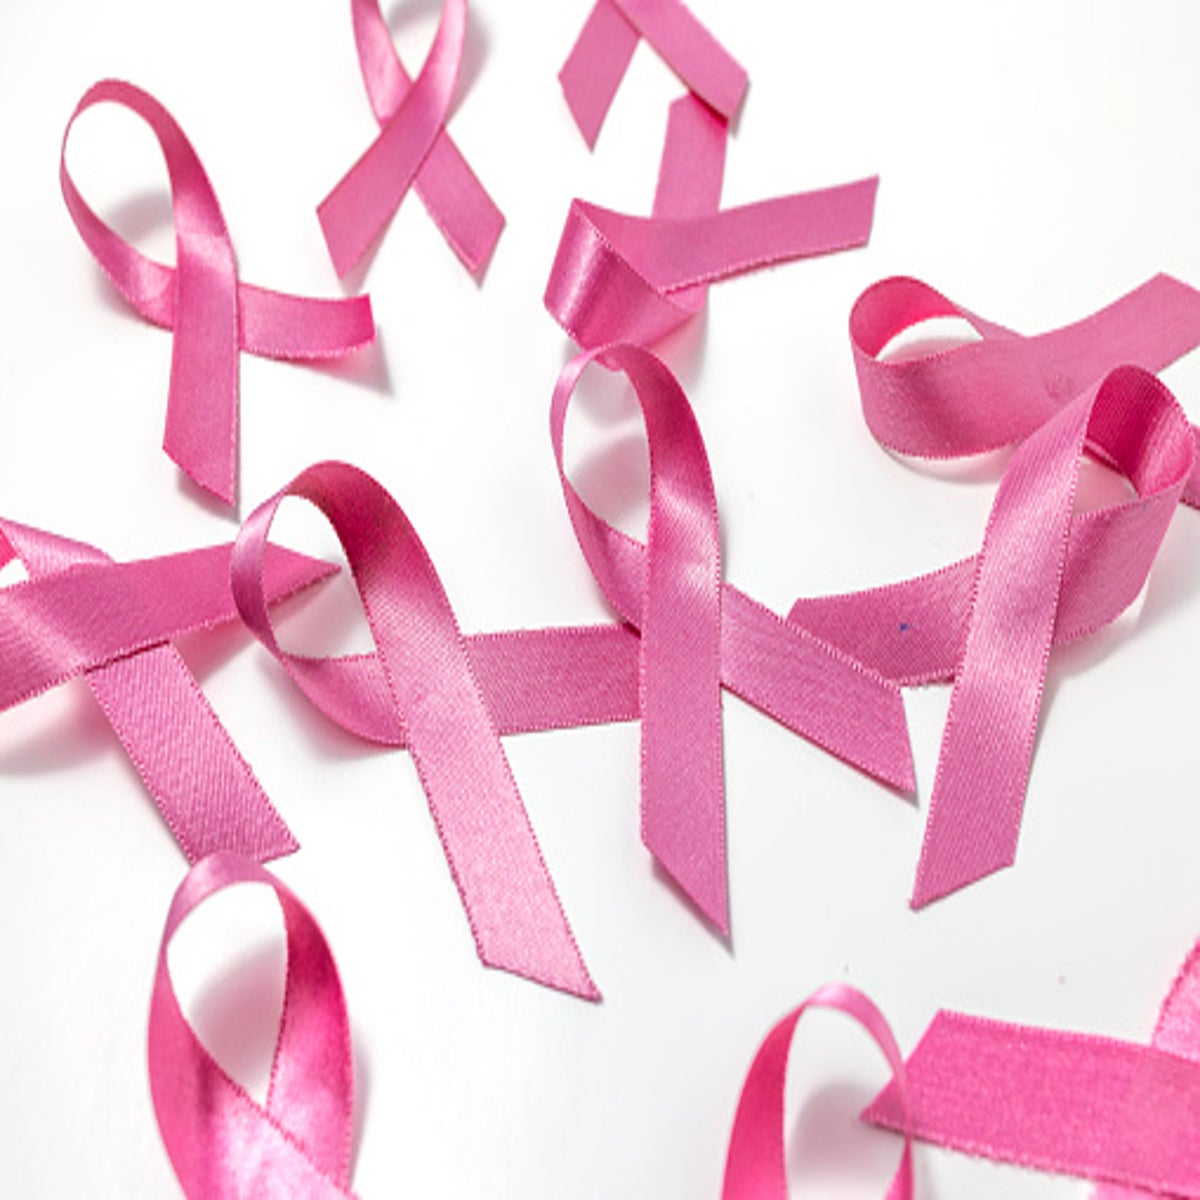 October is Breast Cancer Prevention Month. We Need Your Support